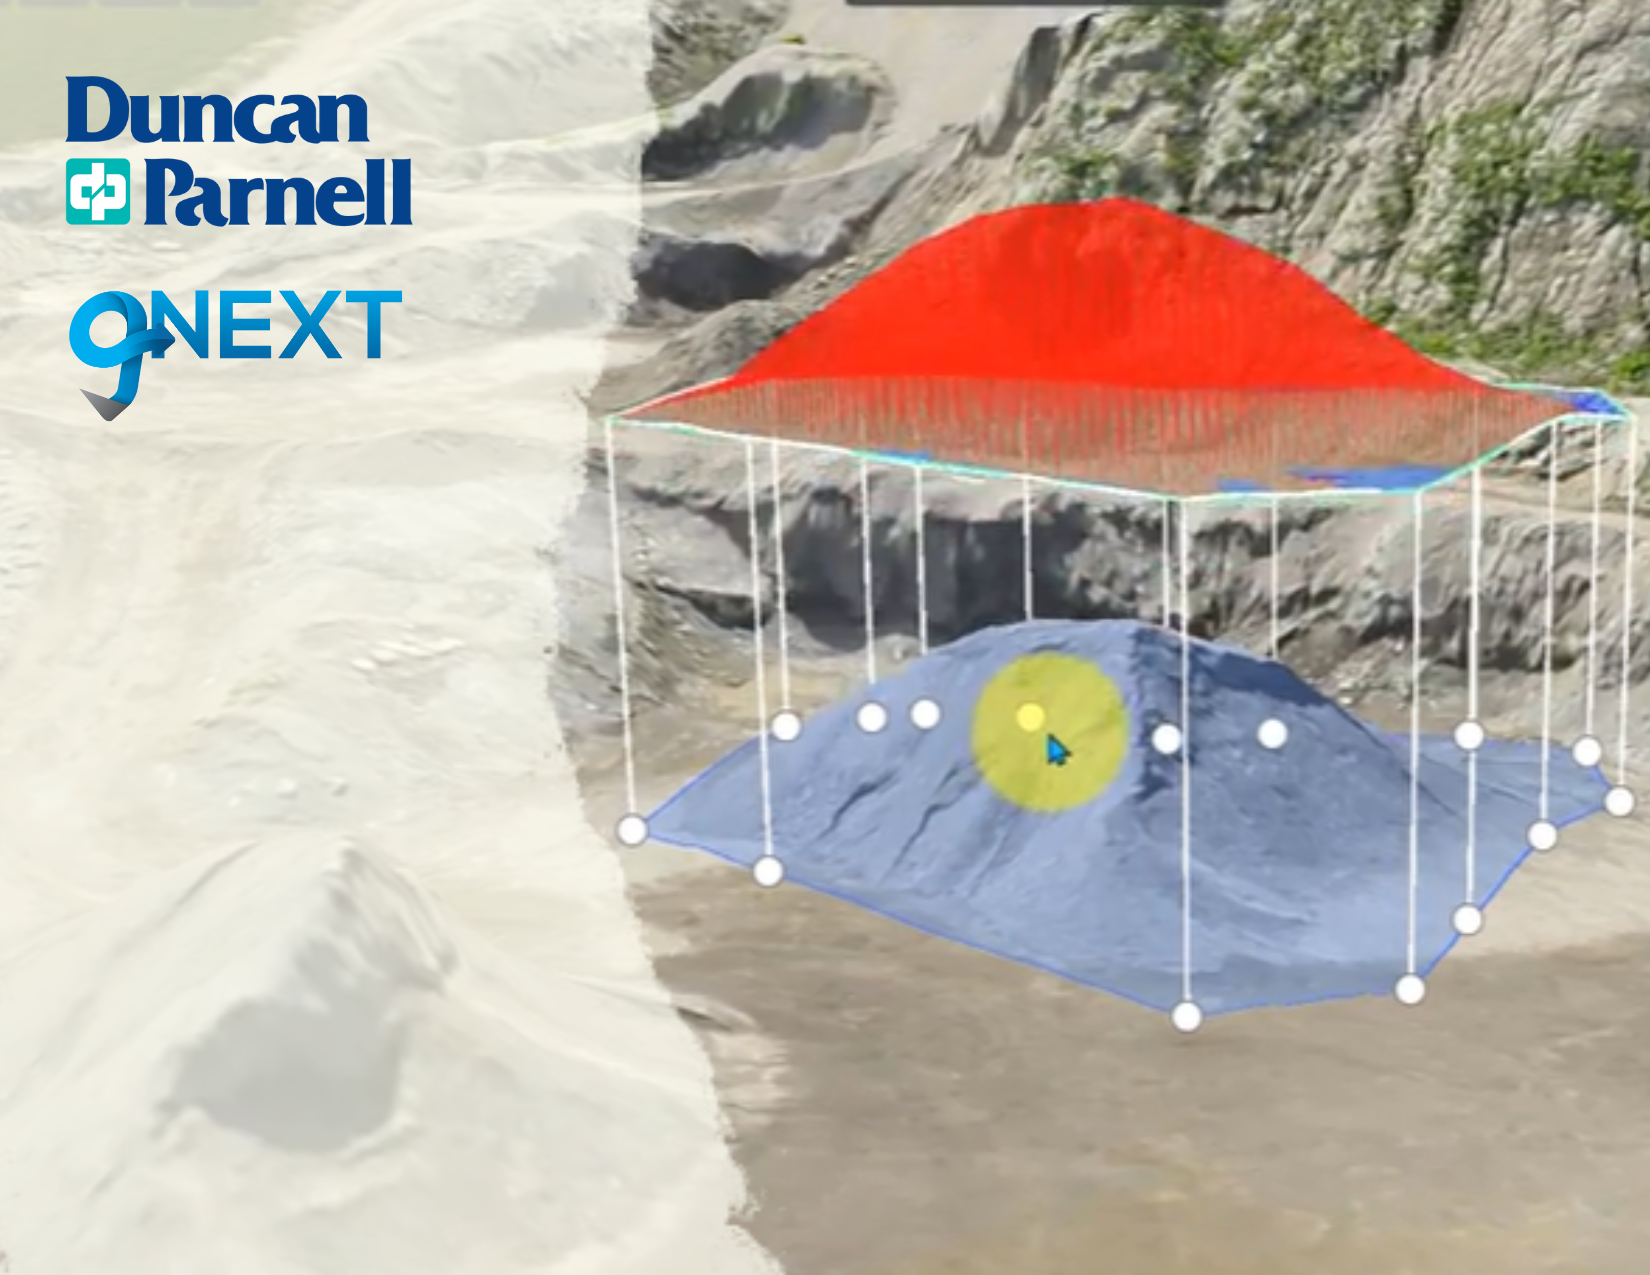 Duncan-Parnell Partners with gNext to Deliver Customers a Top-of-the-Line Drone Inspection Platform